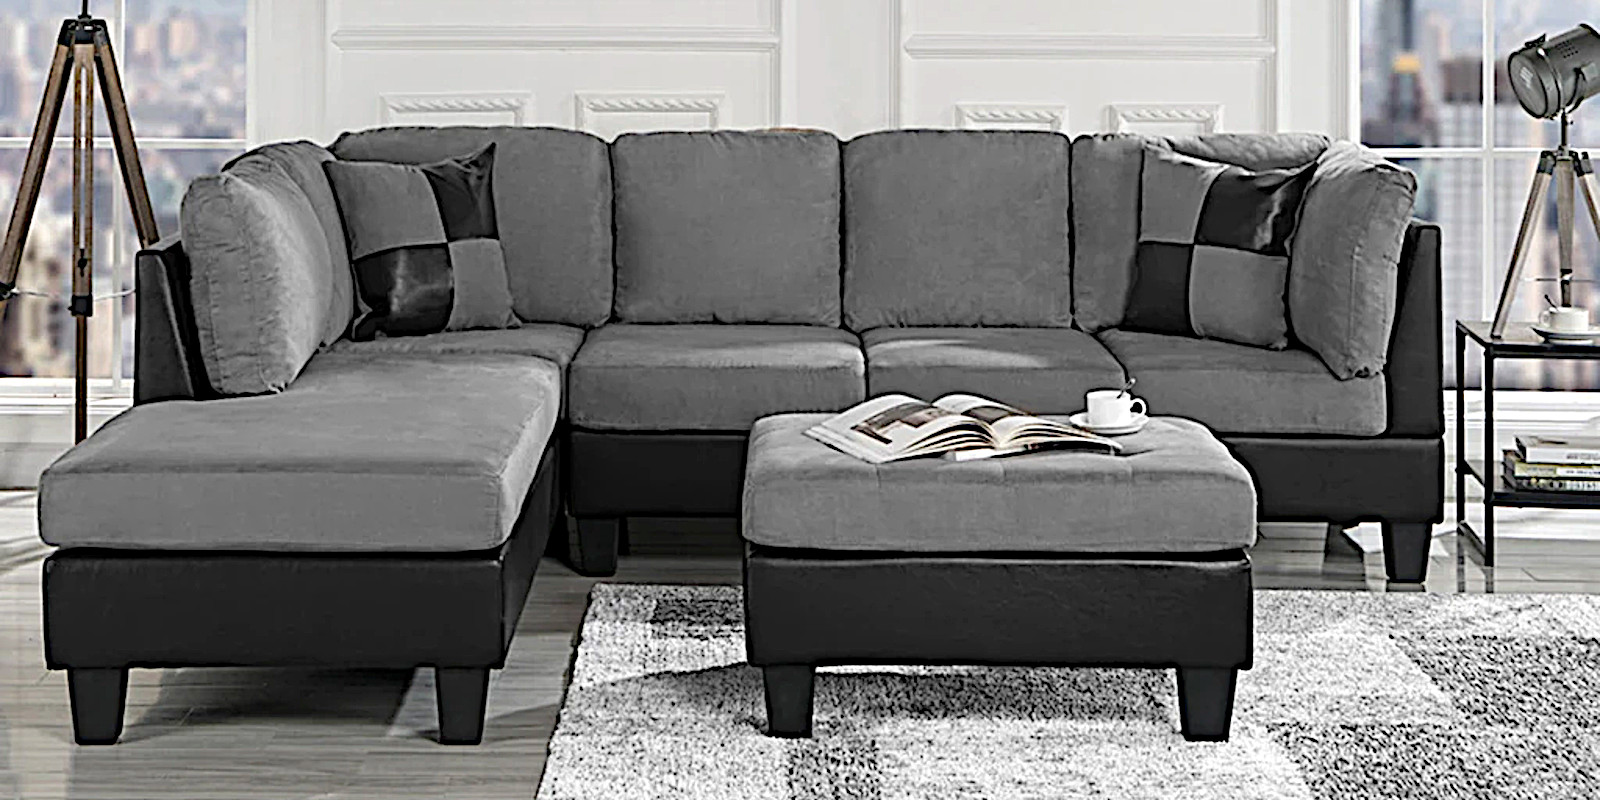 Low-priced sectionals